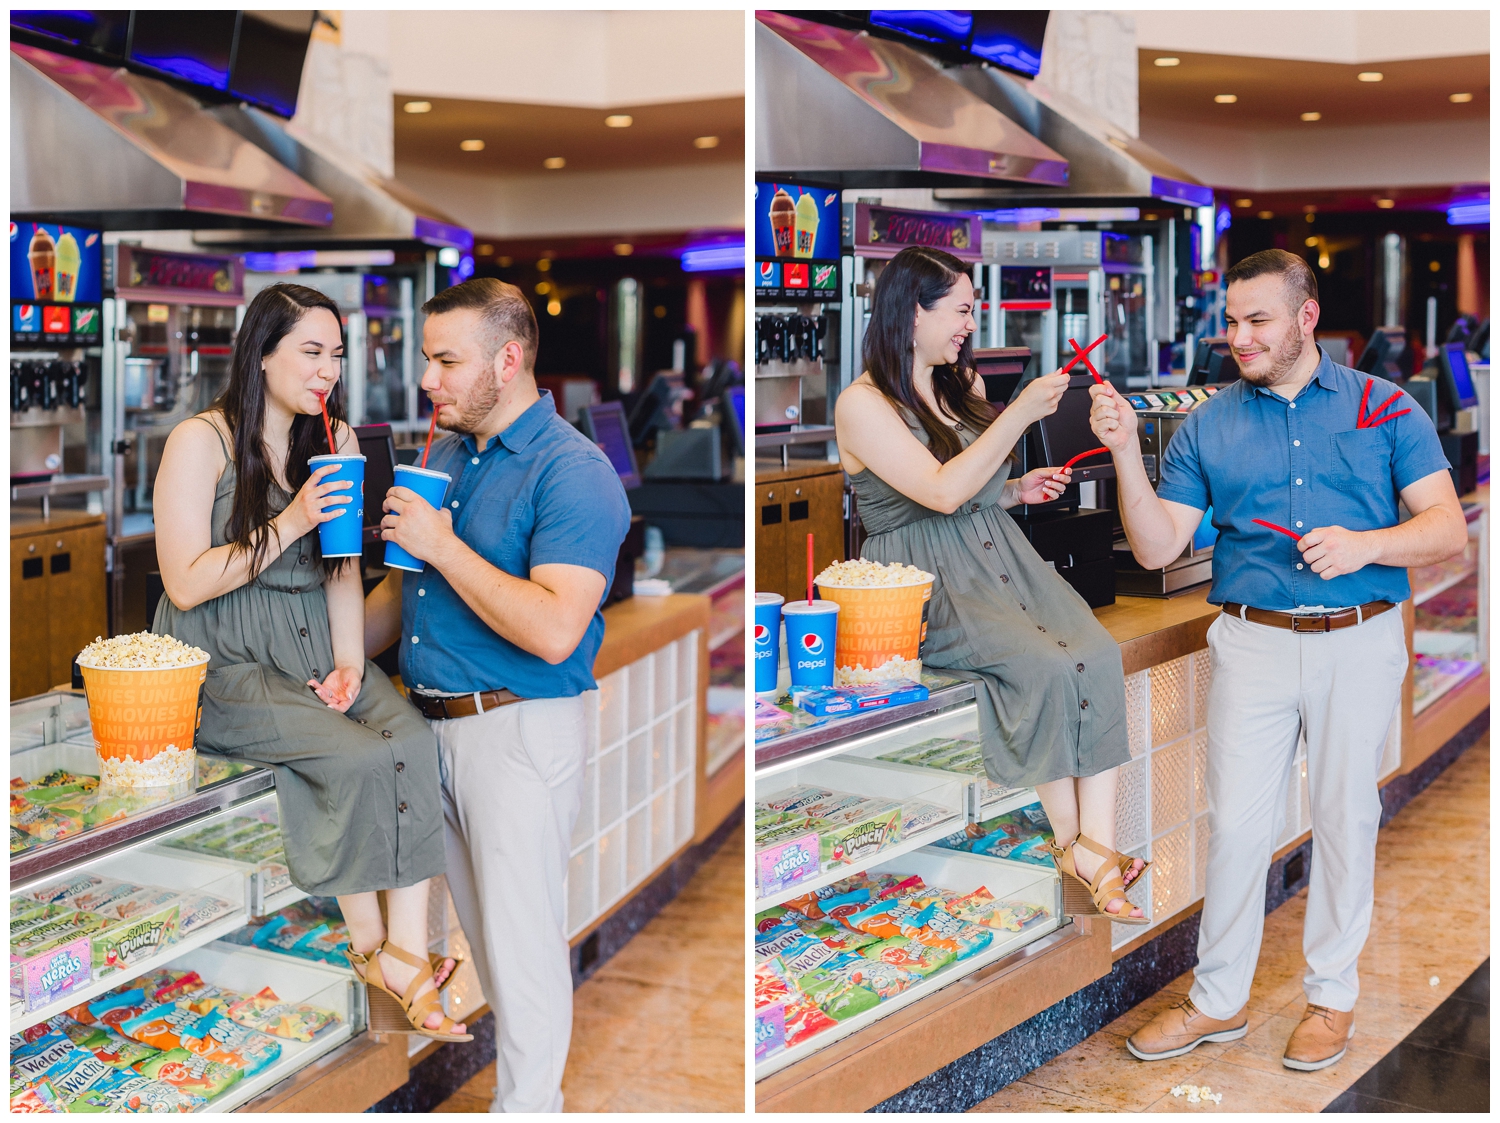 couple sitting on concession stand inside movie theater eating candy